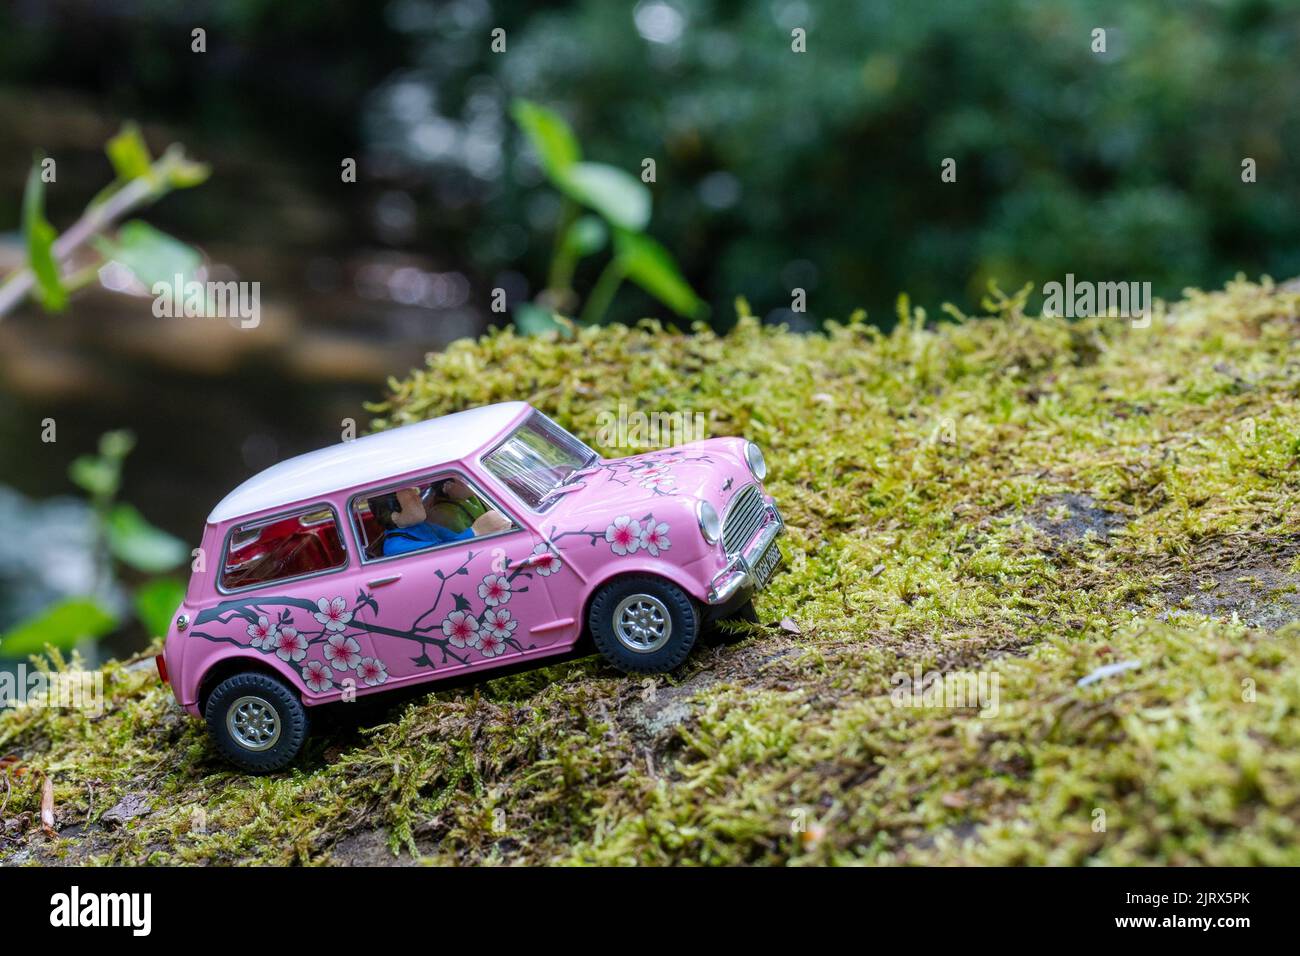 Scalextric Morris Mini Cooper 'Twiggy Flower Power' pink model car in a nature scene, on a mossy stone. Stock Photo